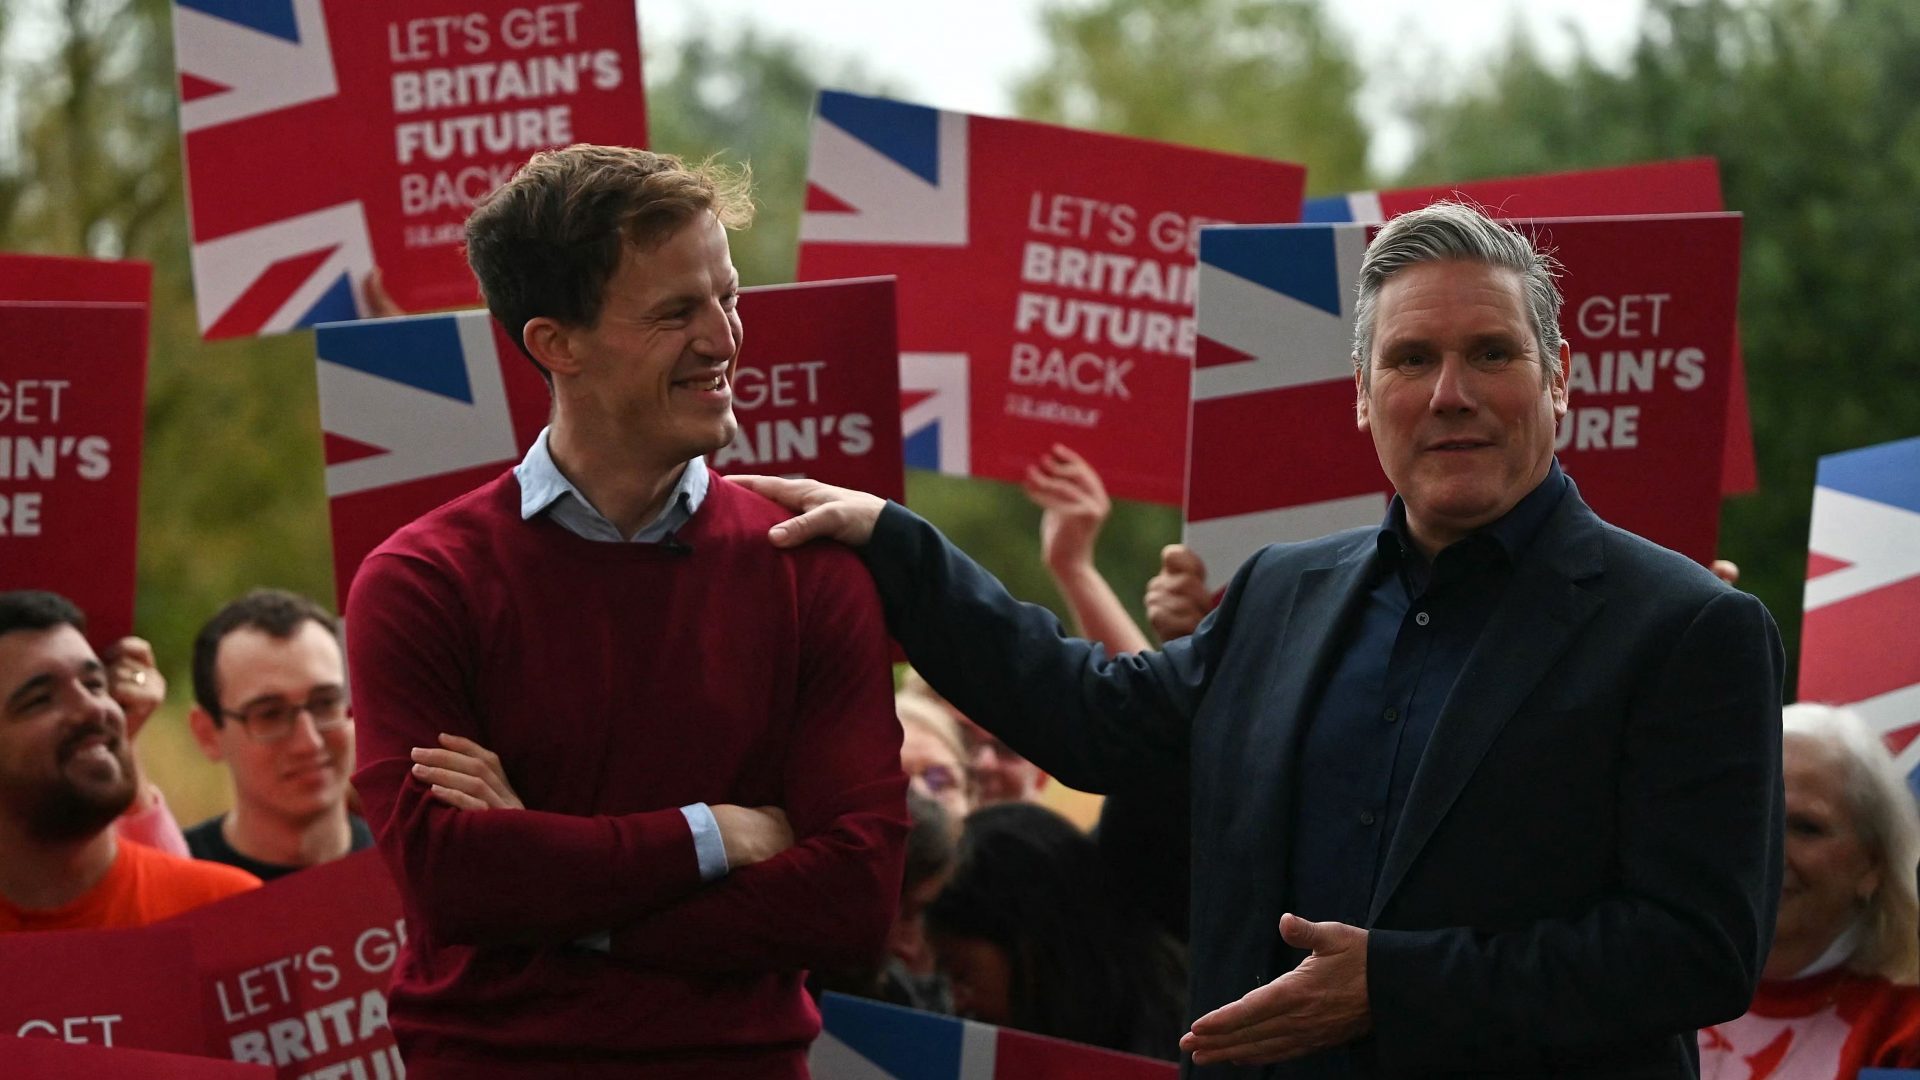 Britain's main opposition Labour Party leader Keir Starmer (R) speaks next to newly elected Labour MP Alistair Strathern as they celebrate in Bedford after winning the Mid-Bedfordshire parliamentary by-election. Photo: JUSTIN TALLIS/AFP via Getty Images